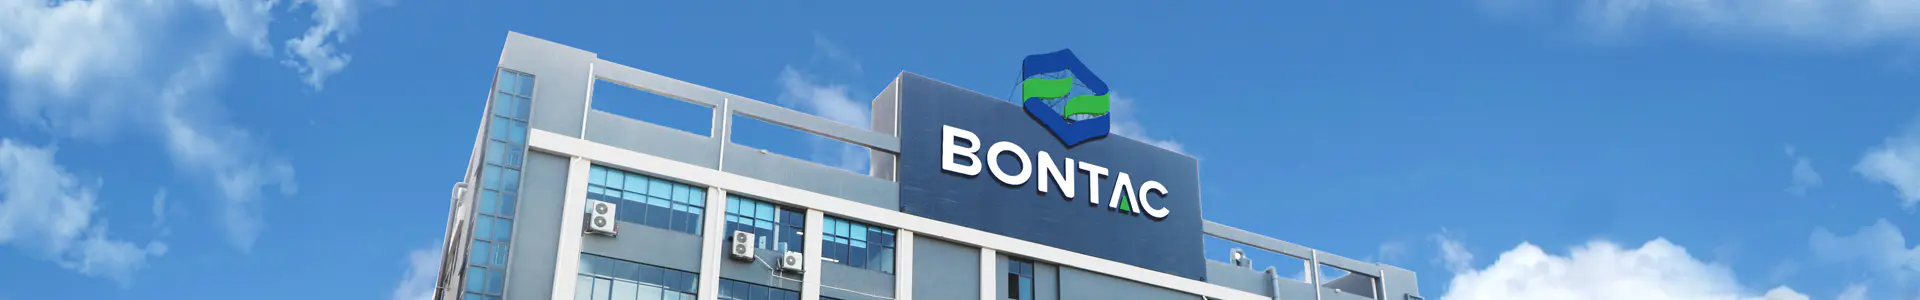 BONTAC’s Patent-grade Coenzymes in 2024 CACLP&CISCE